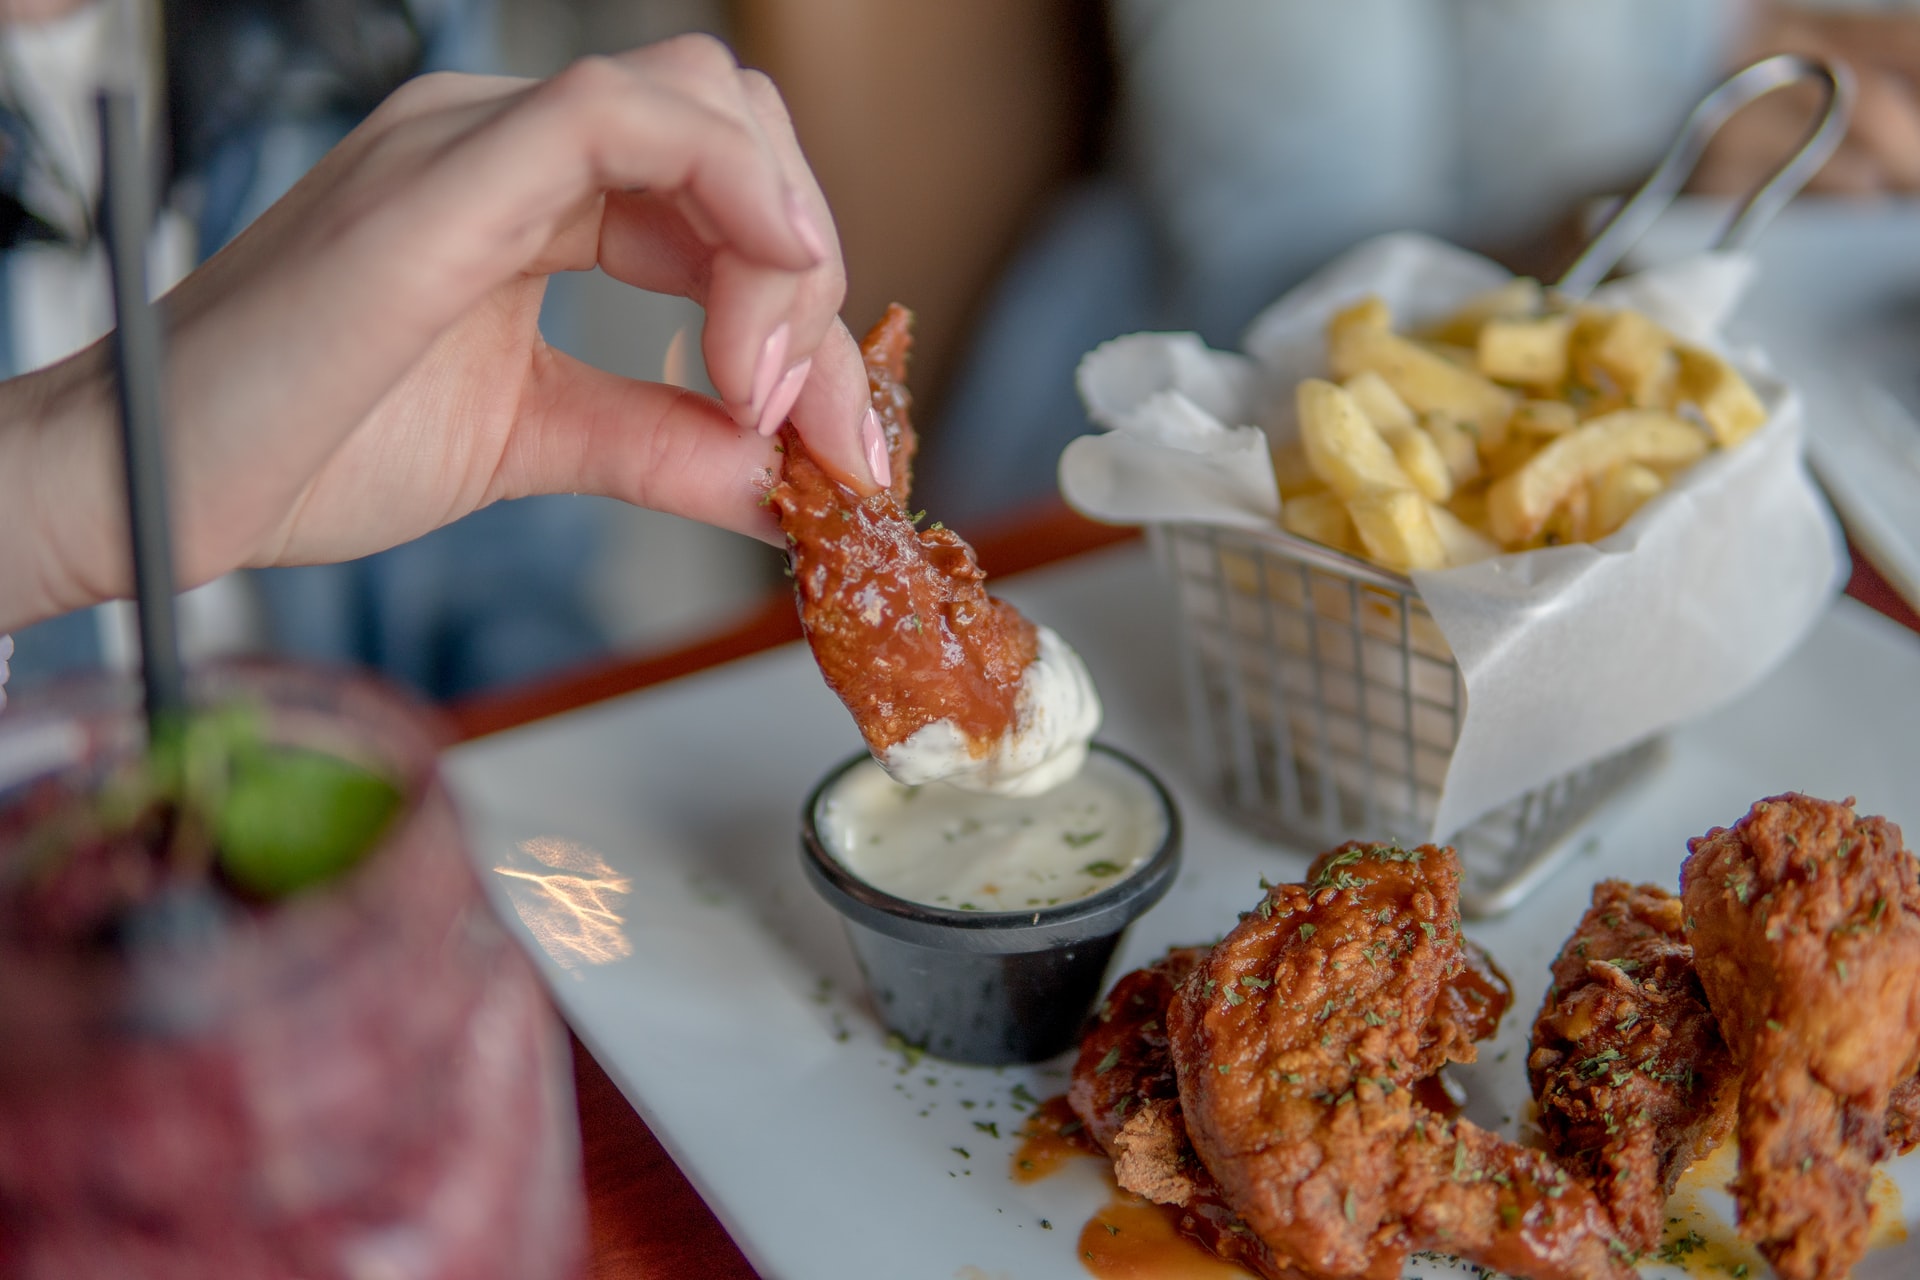 Dipping wings in ranch with side of fries